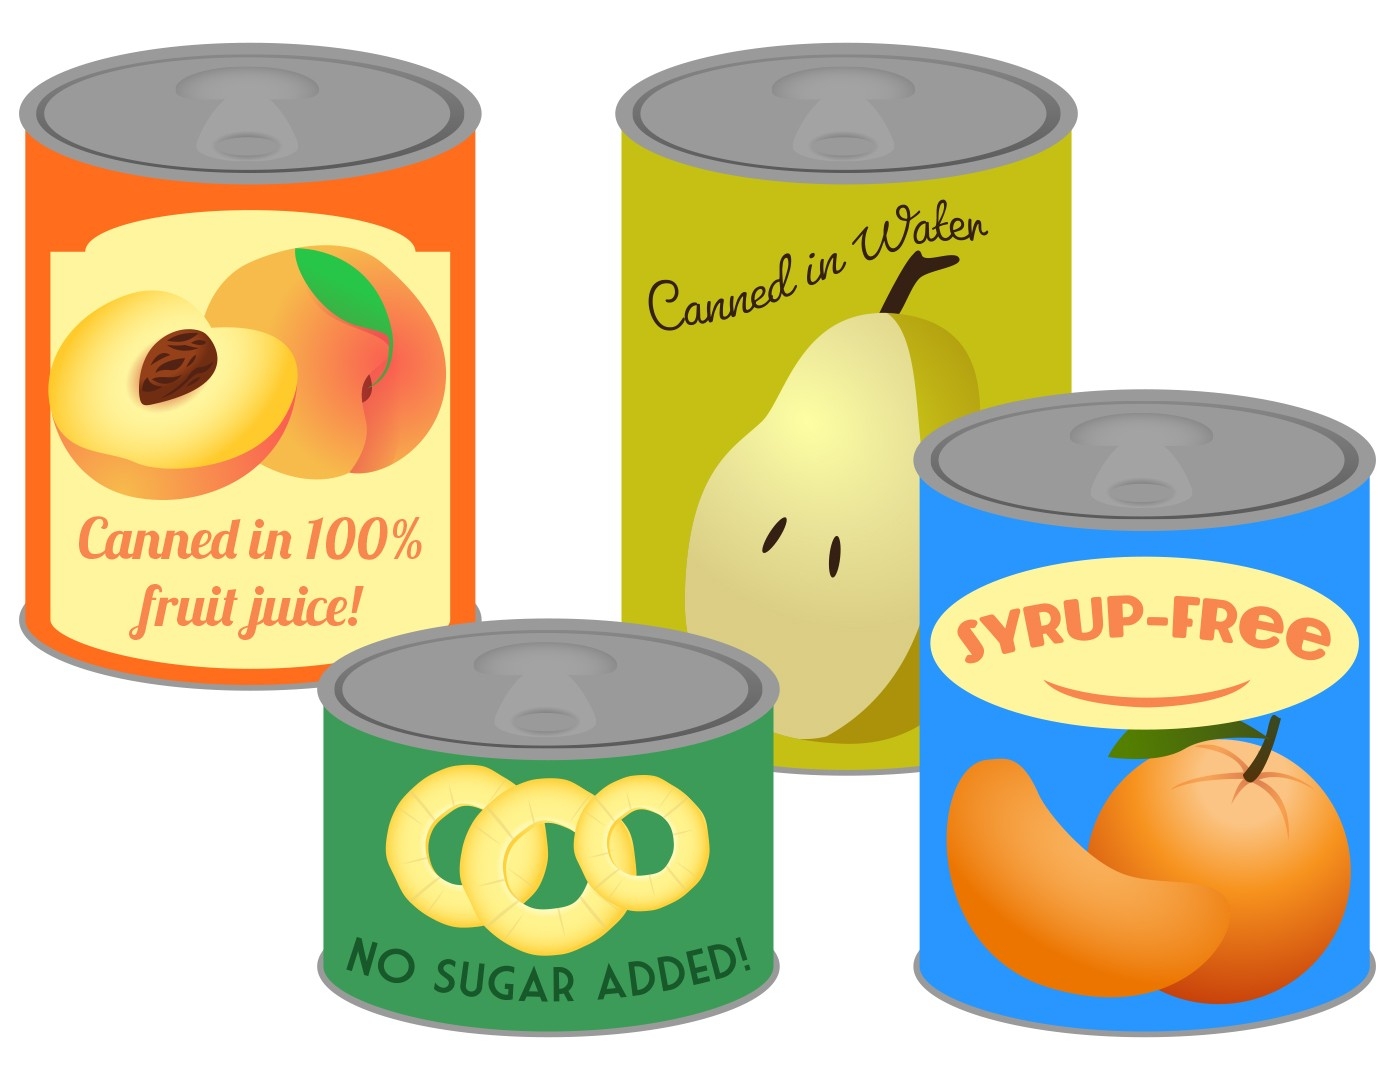 Nutritionist reminded to eat canned food a week should not exceed three times